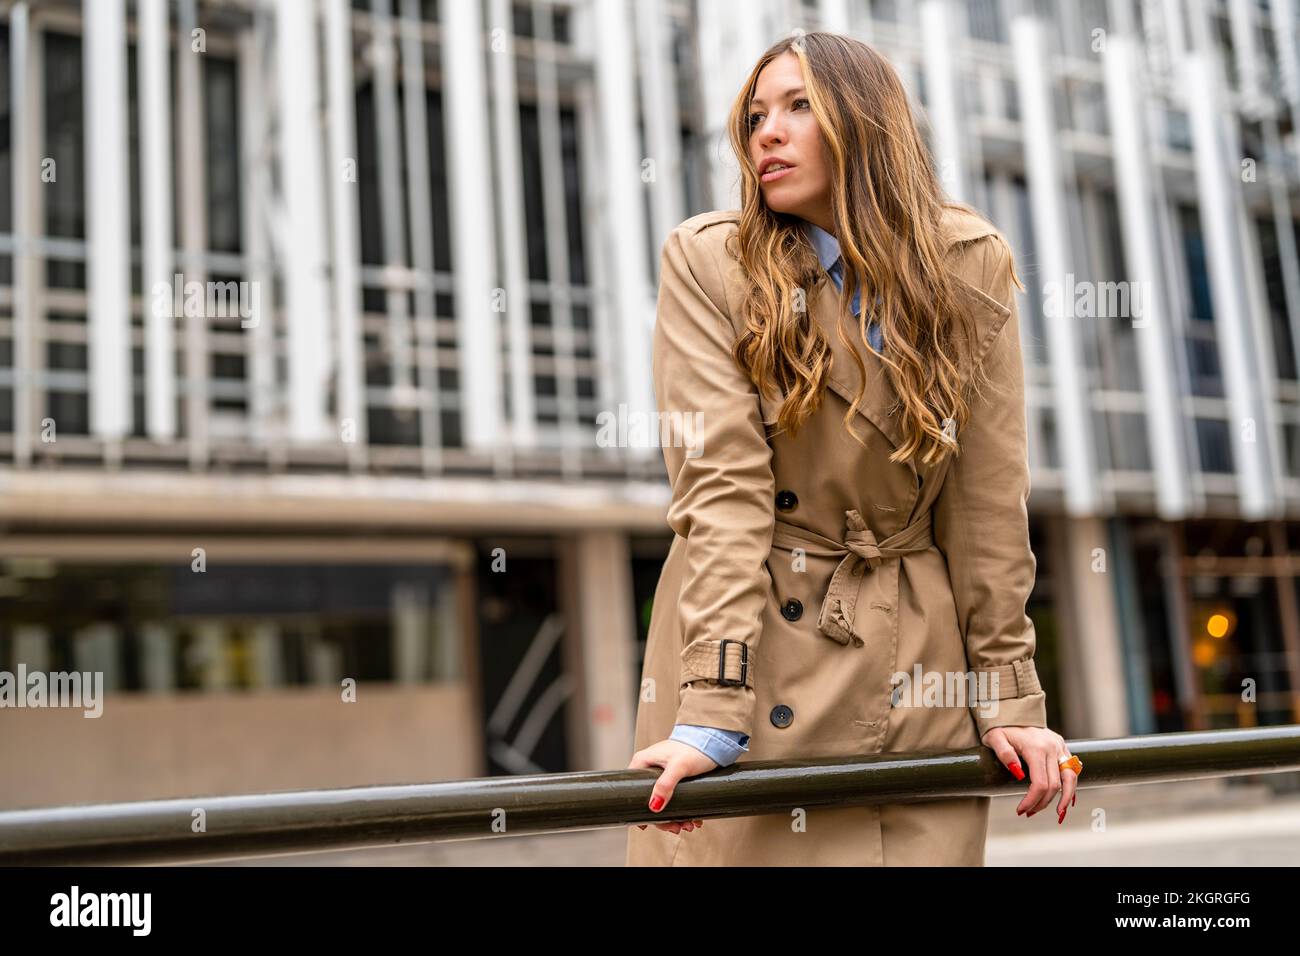 Businesswoman leaning on railing in front of building Stock Photo